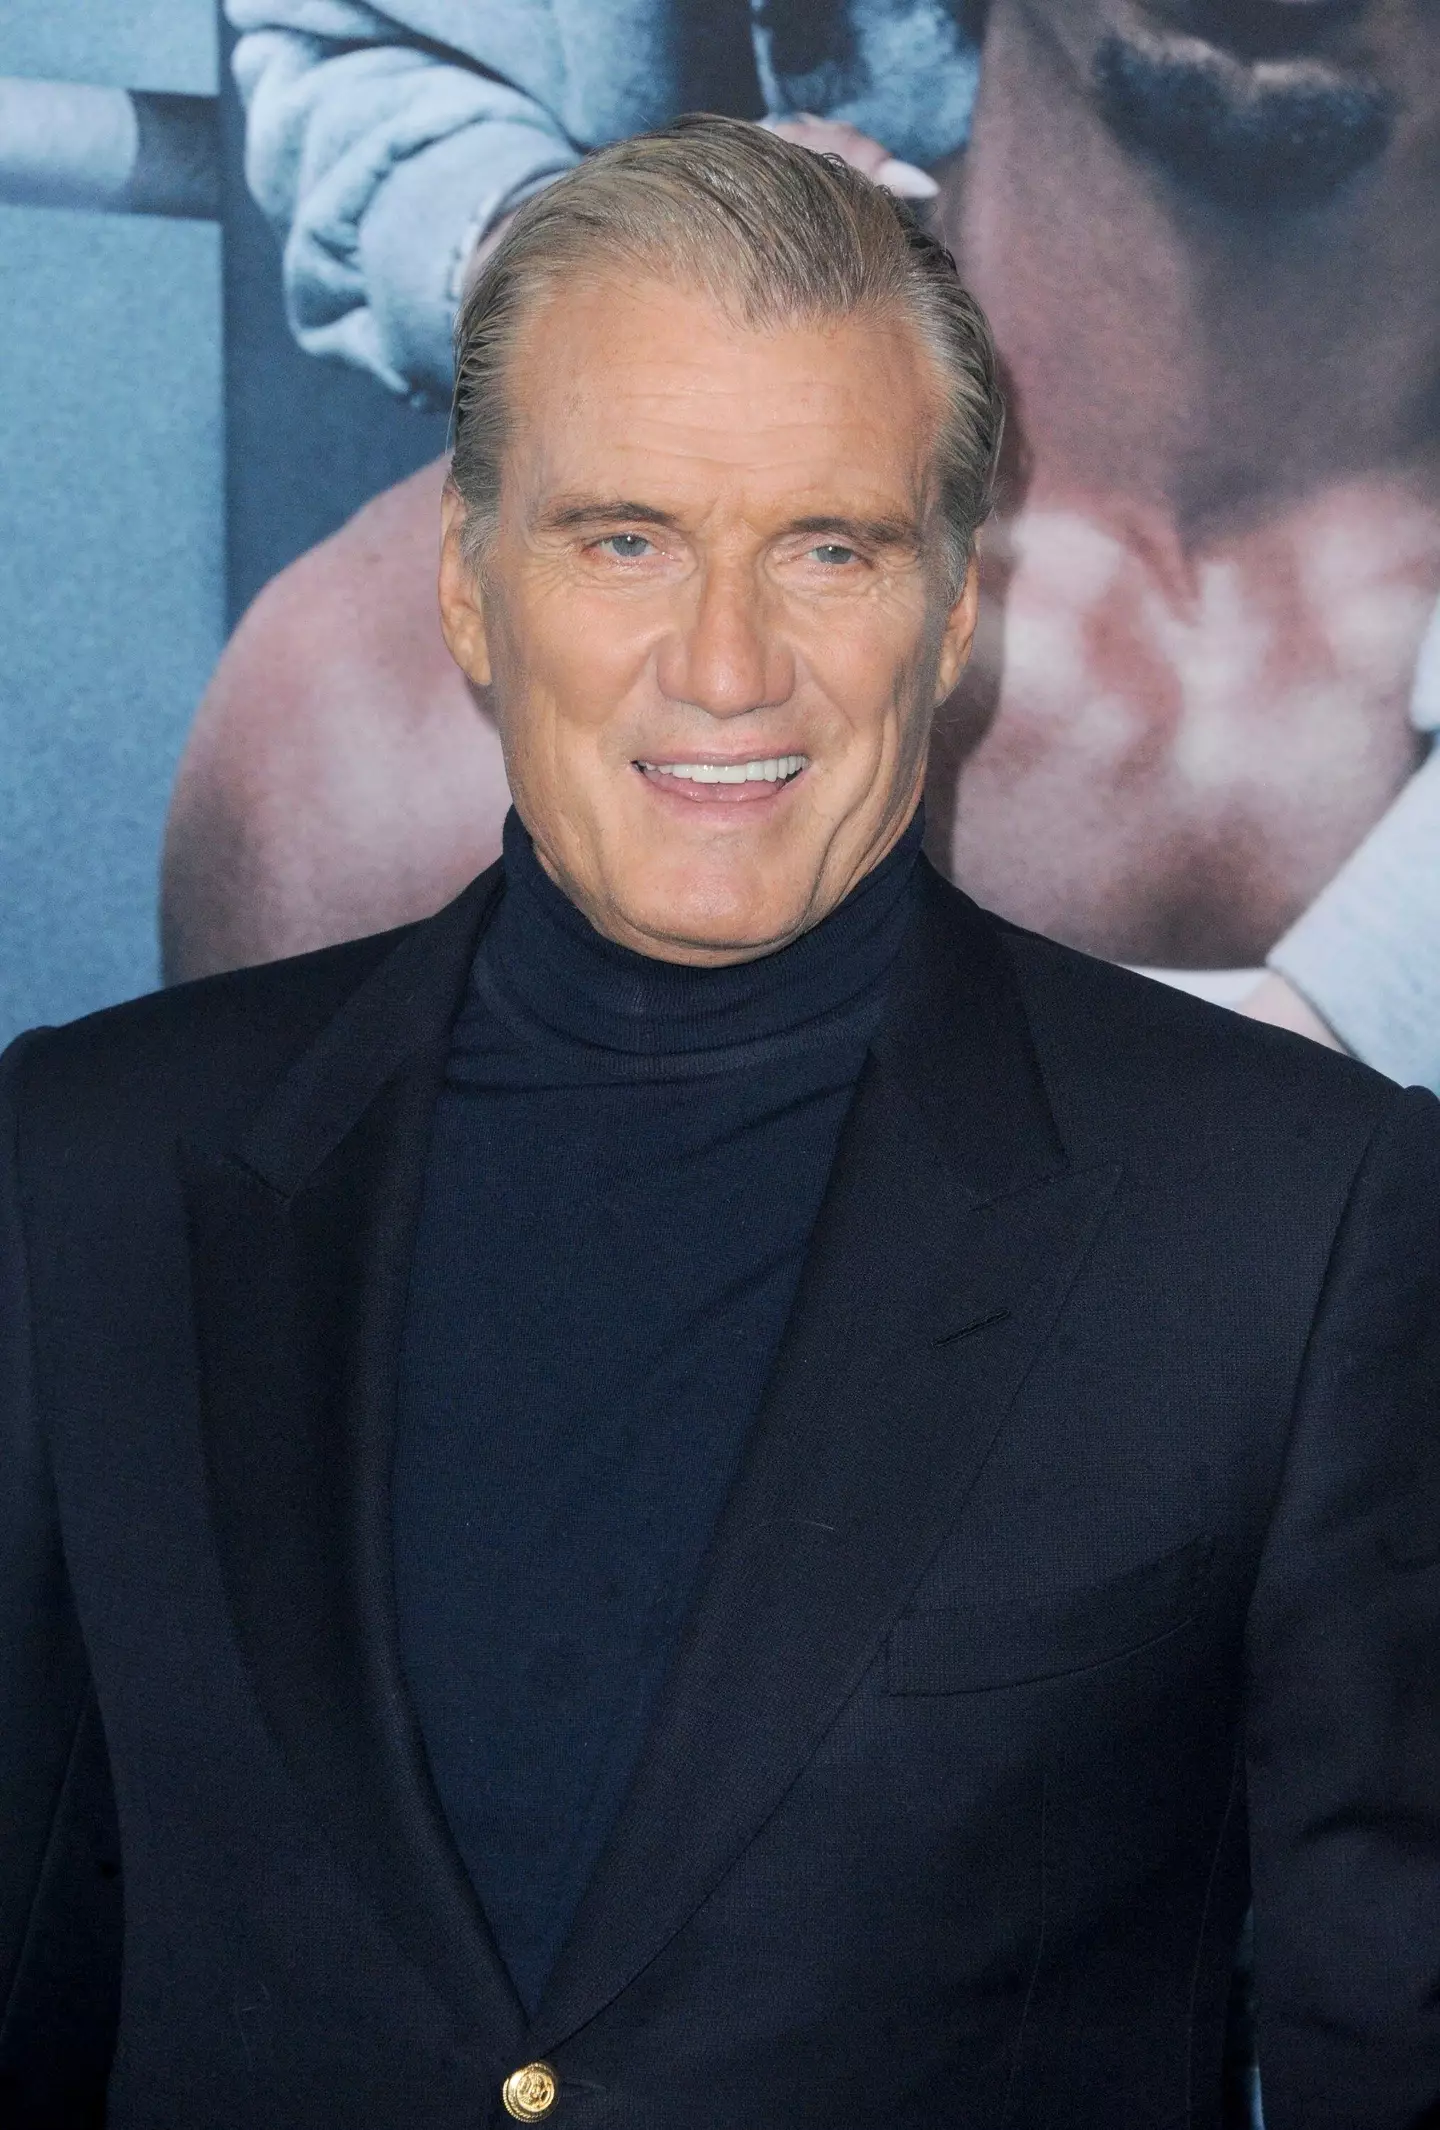 Dolph Lundgren, 65, has revealed that he has cancer .